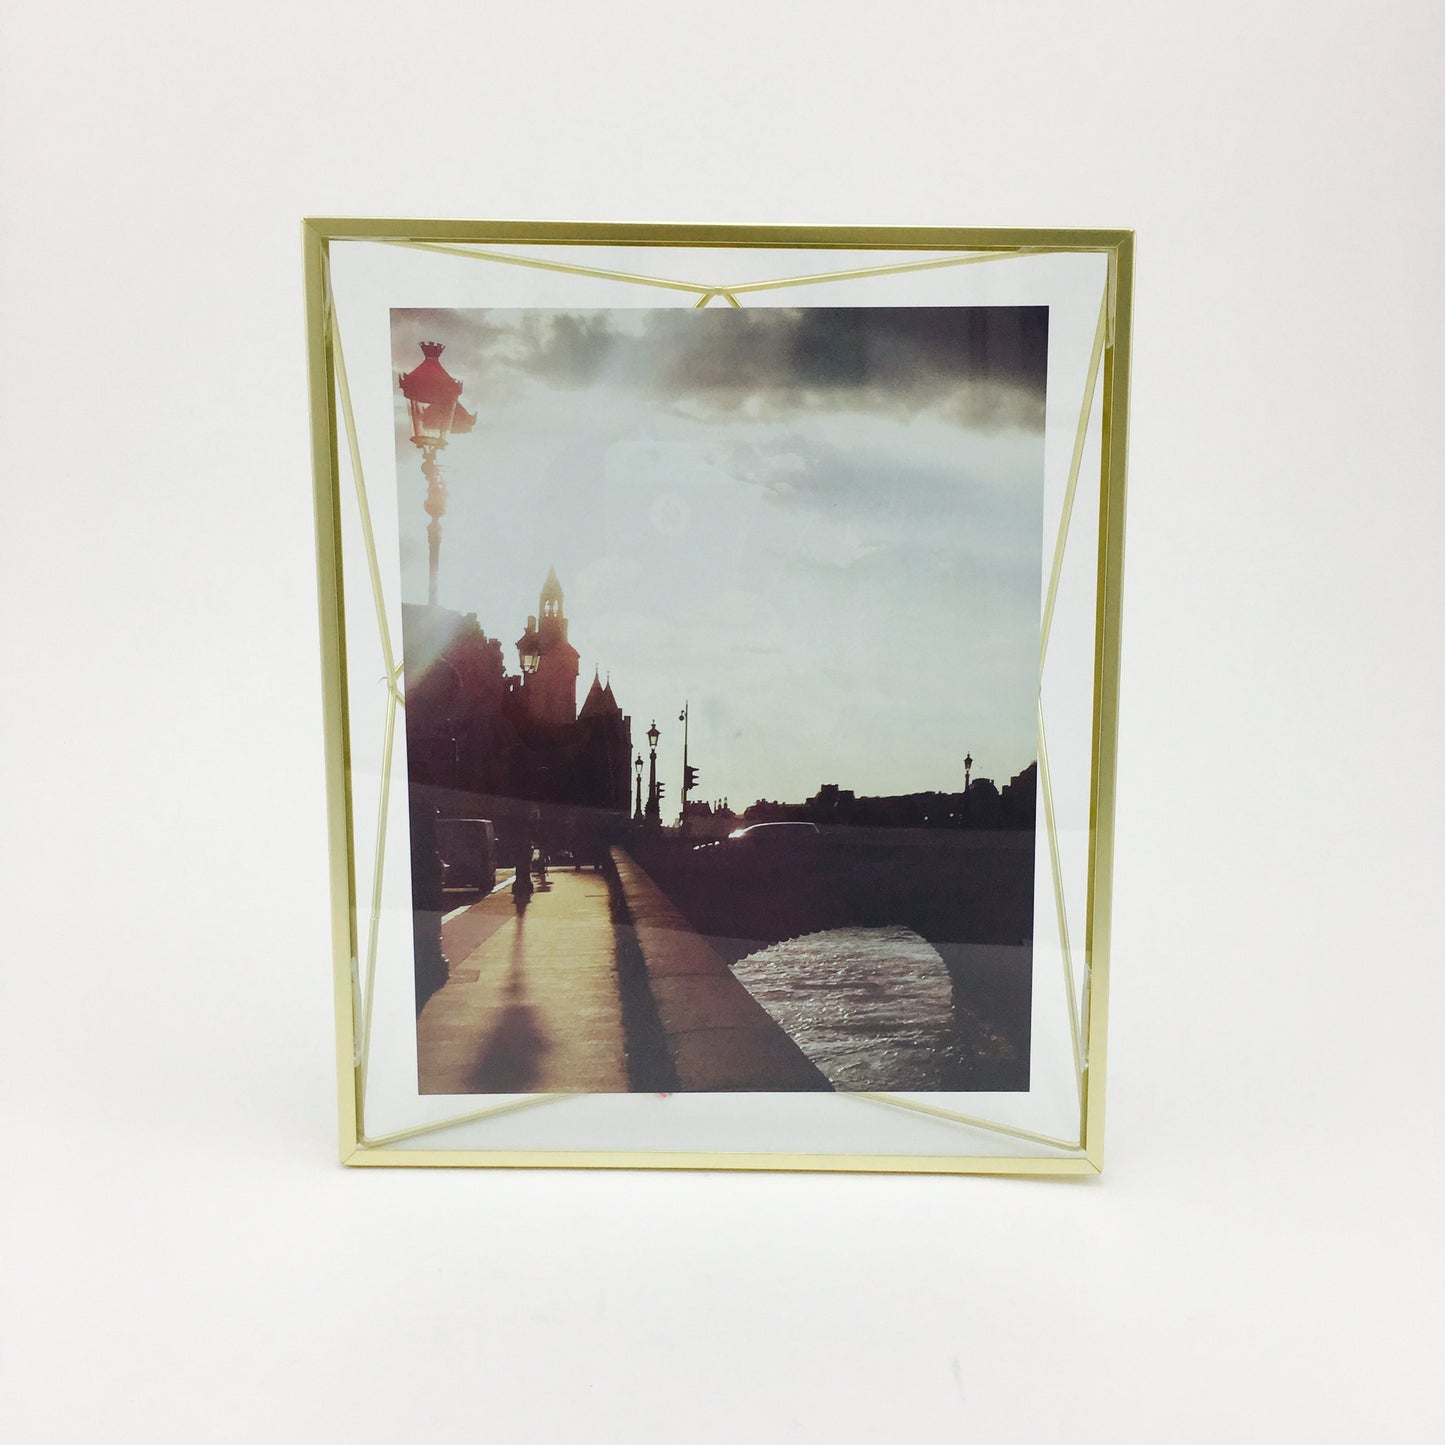 "Prisma" Picture Frames in Matte Brass by Umbra - 8 x 10 inches by Umbra - K. A. Artist Shop